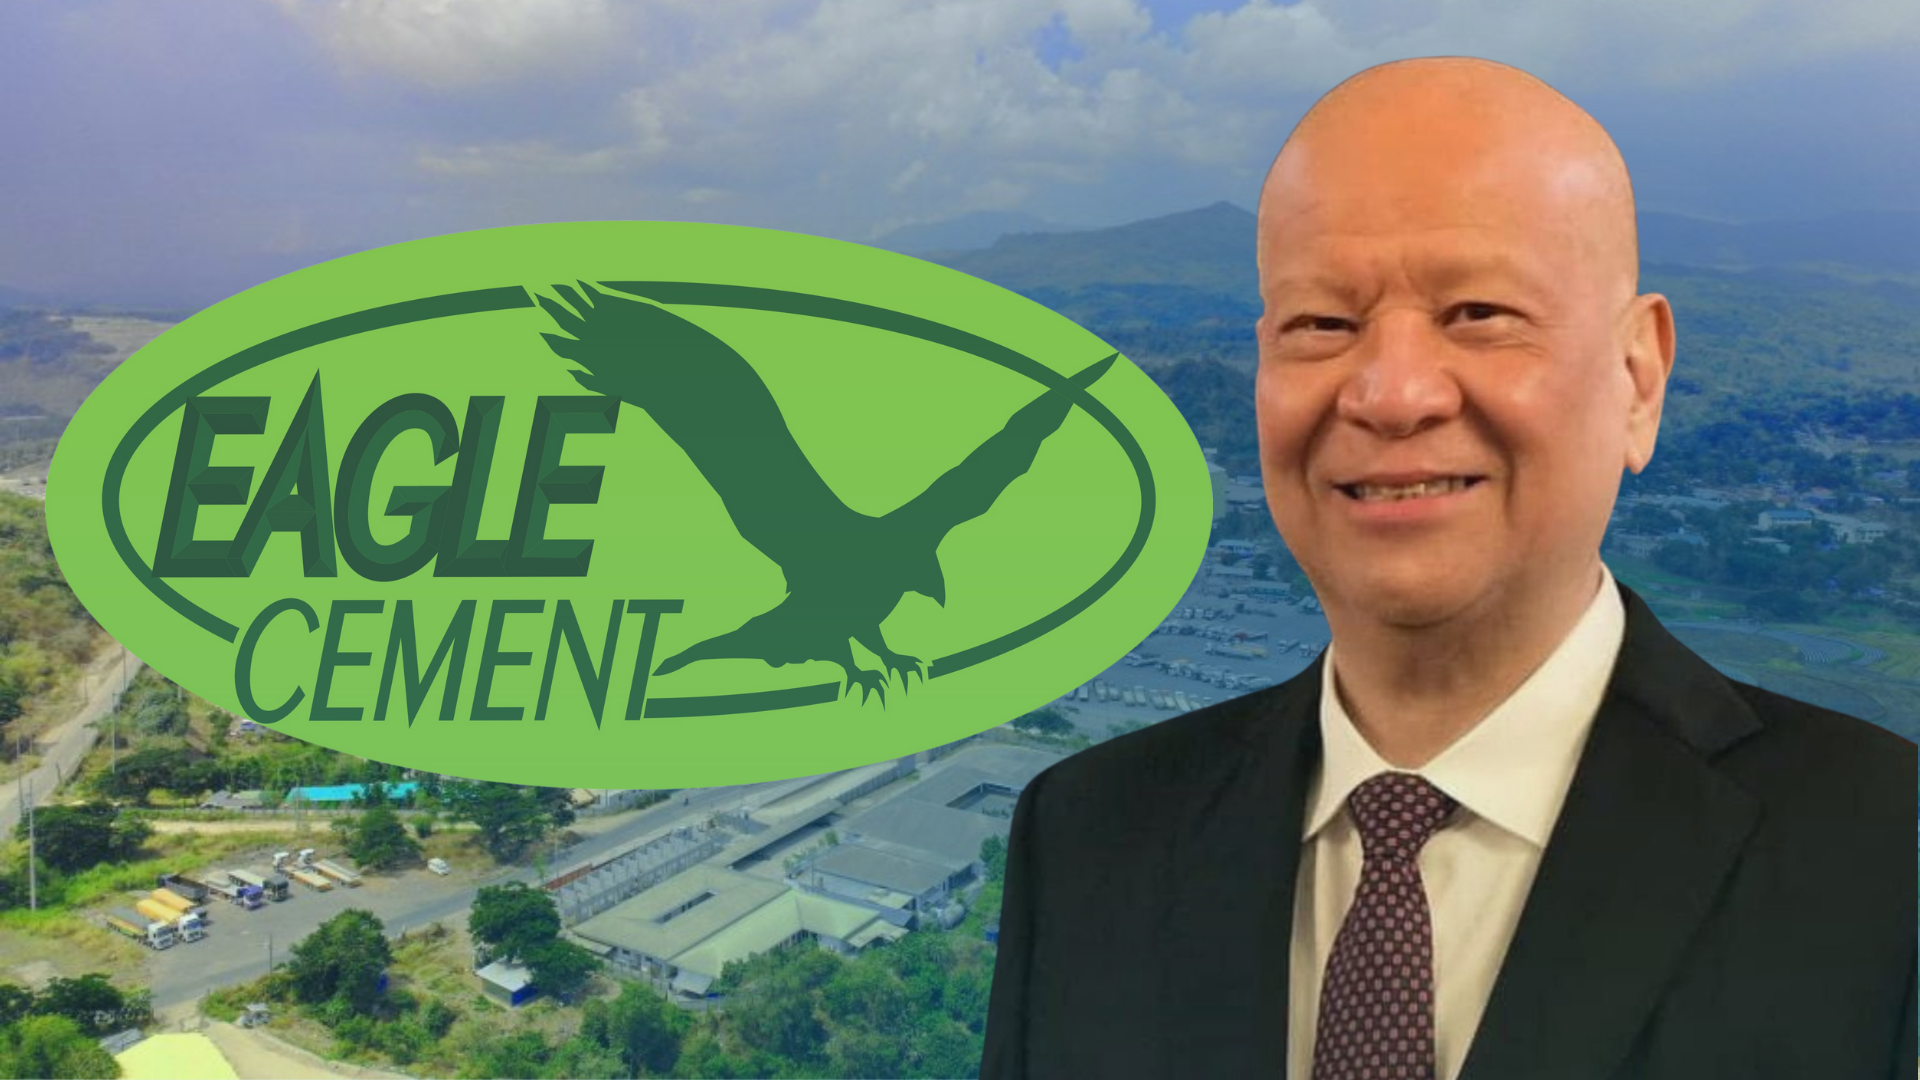 SMC bags Eagle Cement in P97-B takeover deal